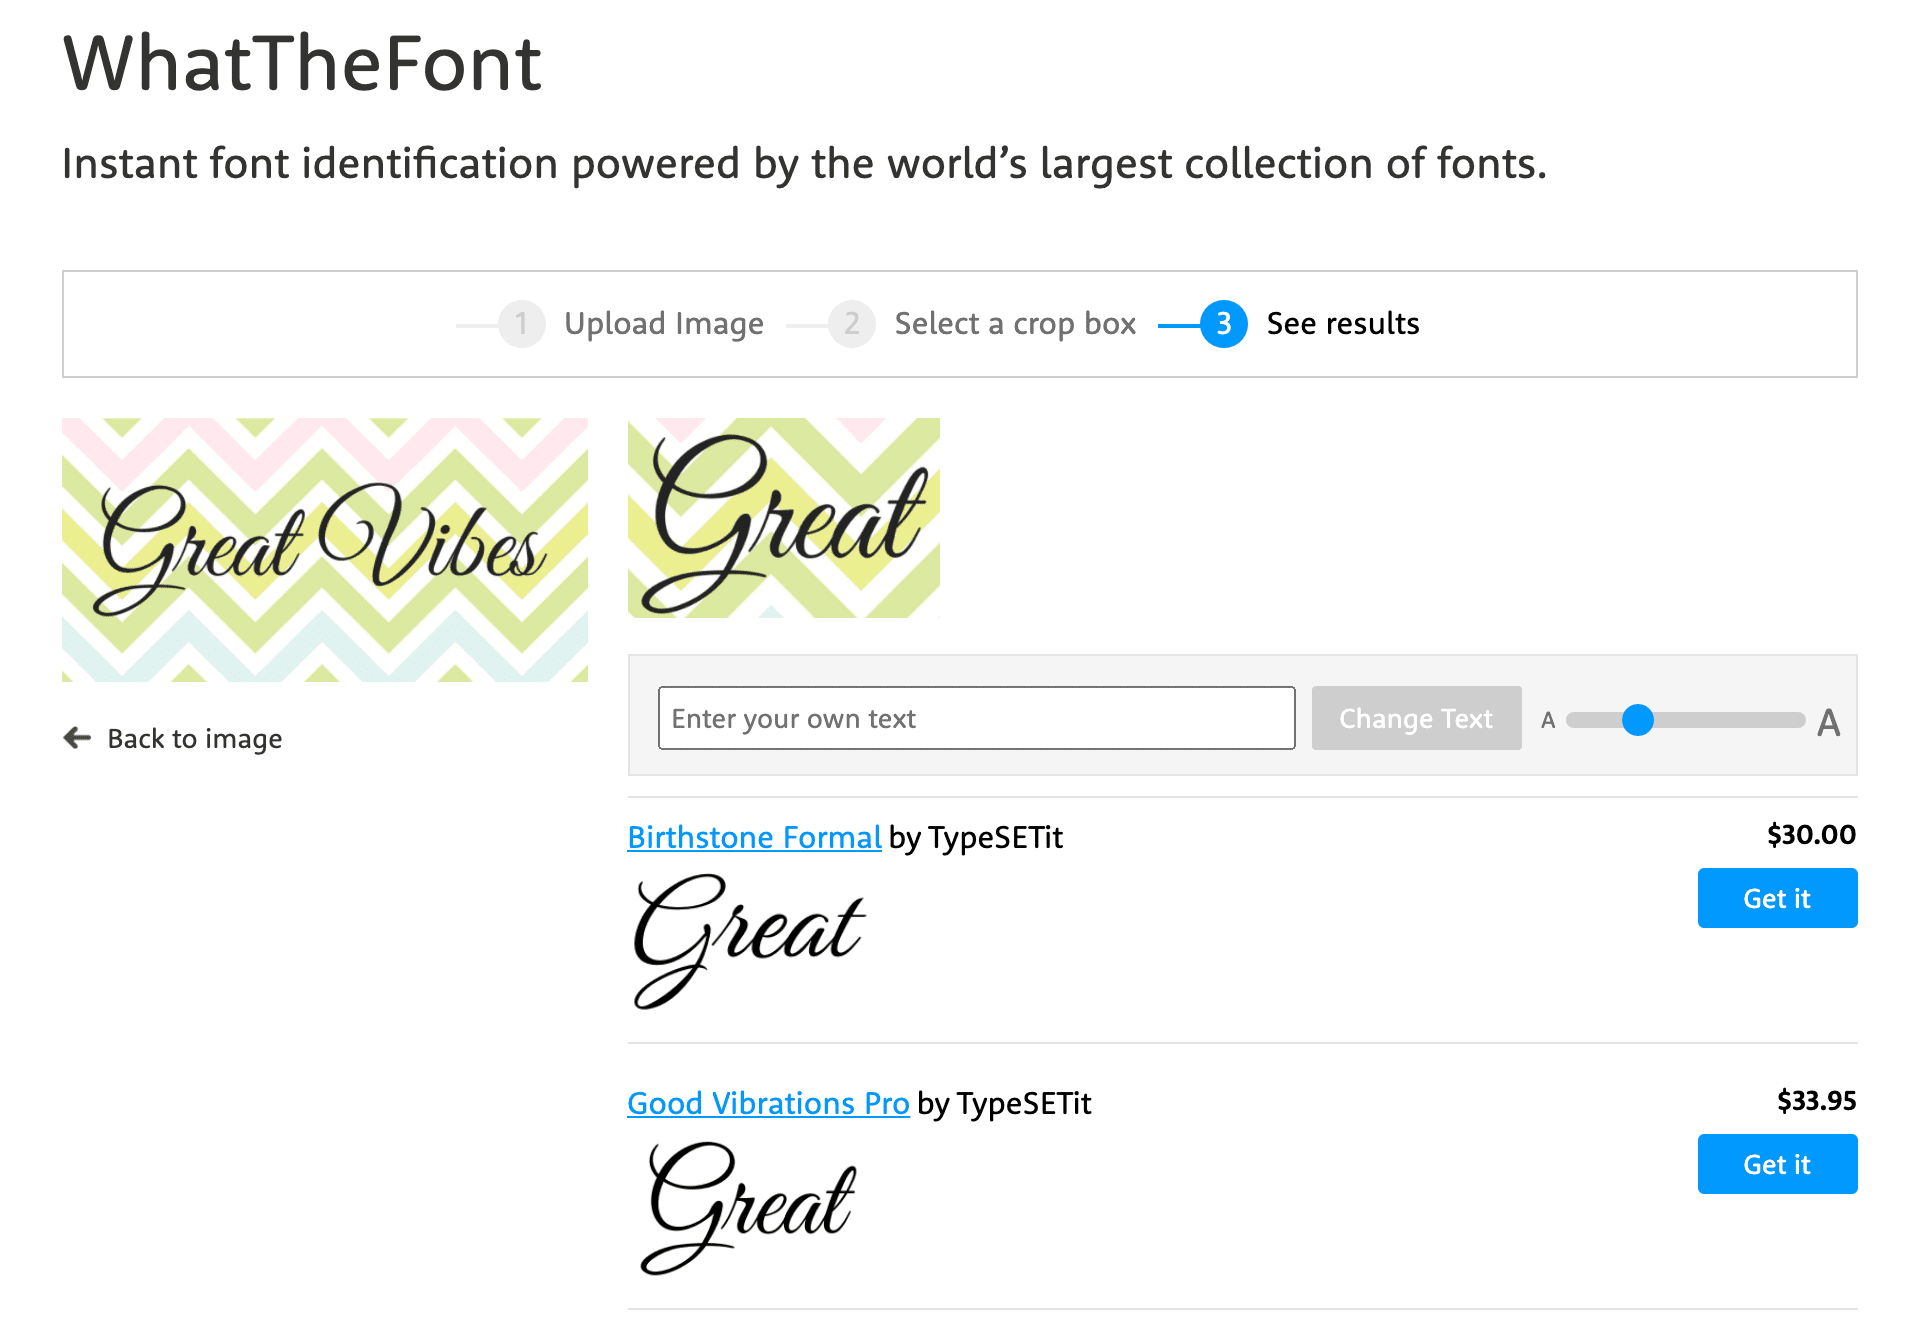 WhatTheFont results.